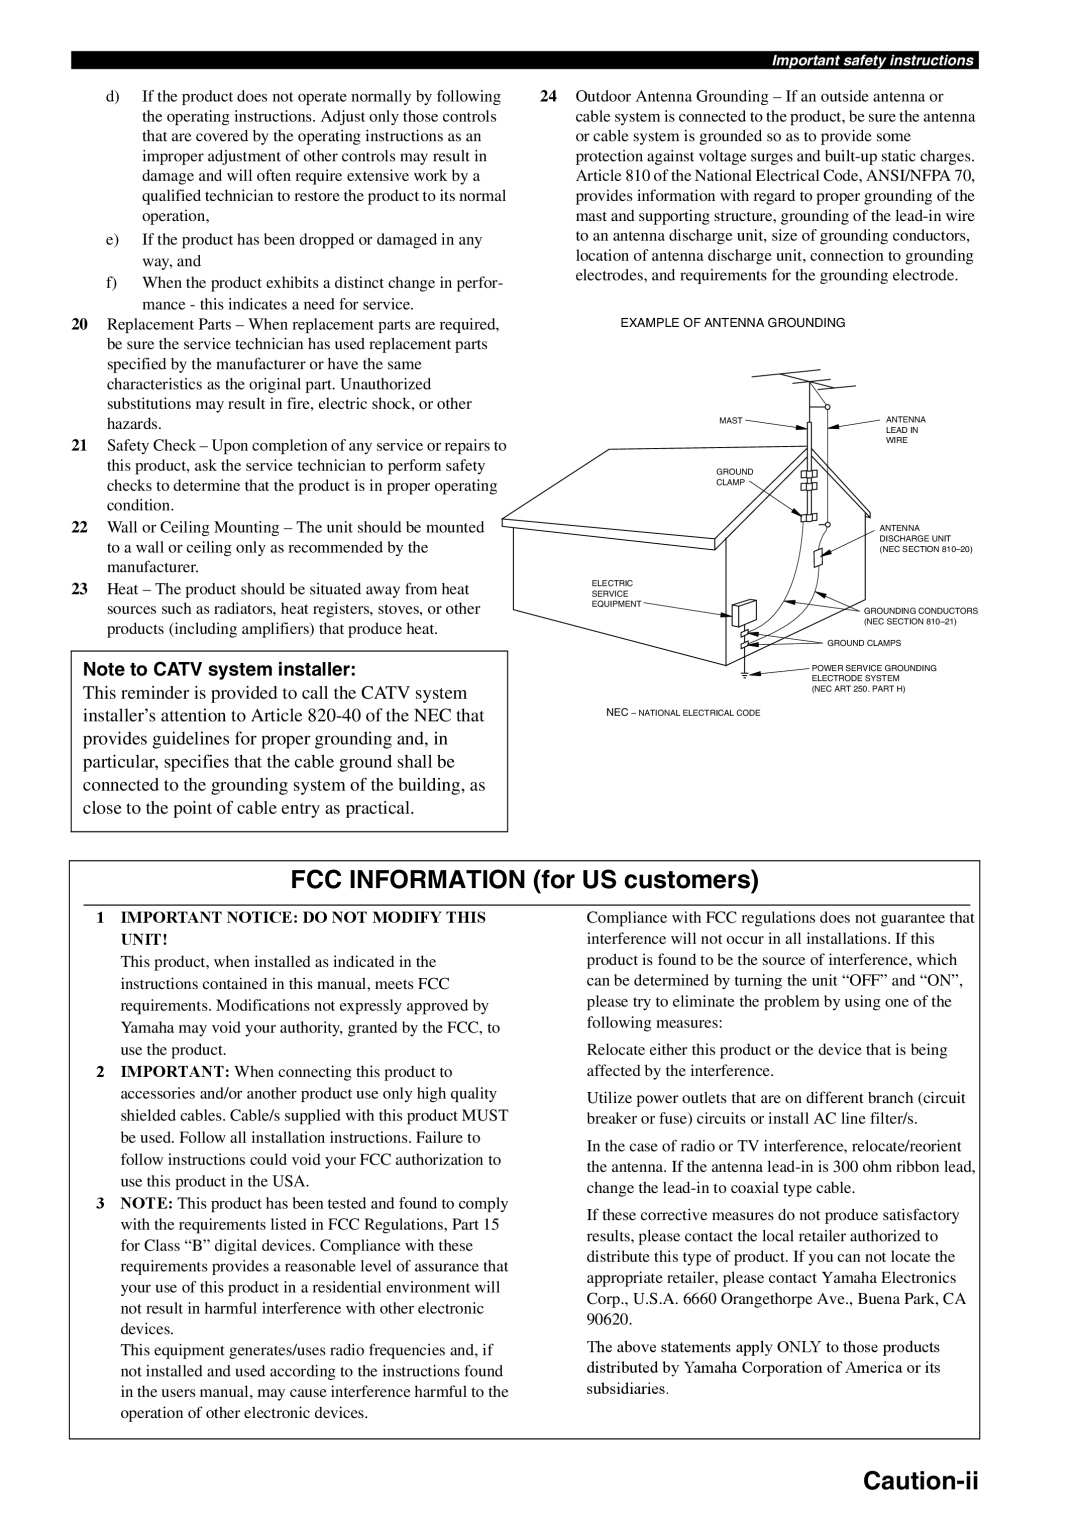 Yamaha HTR-6060 owner manual FCC INFORMATION for US customers, Caution-ii, Note to CATV system installer 